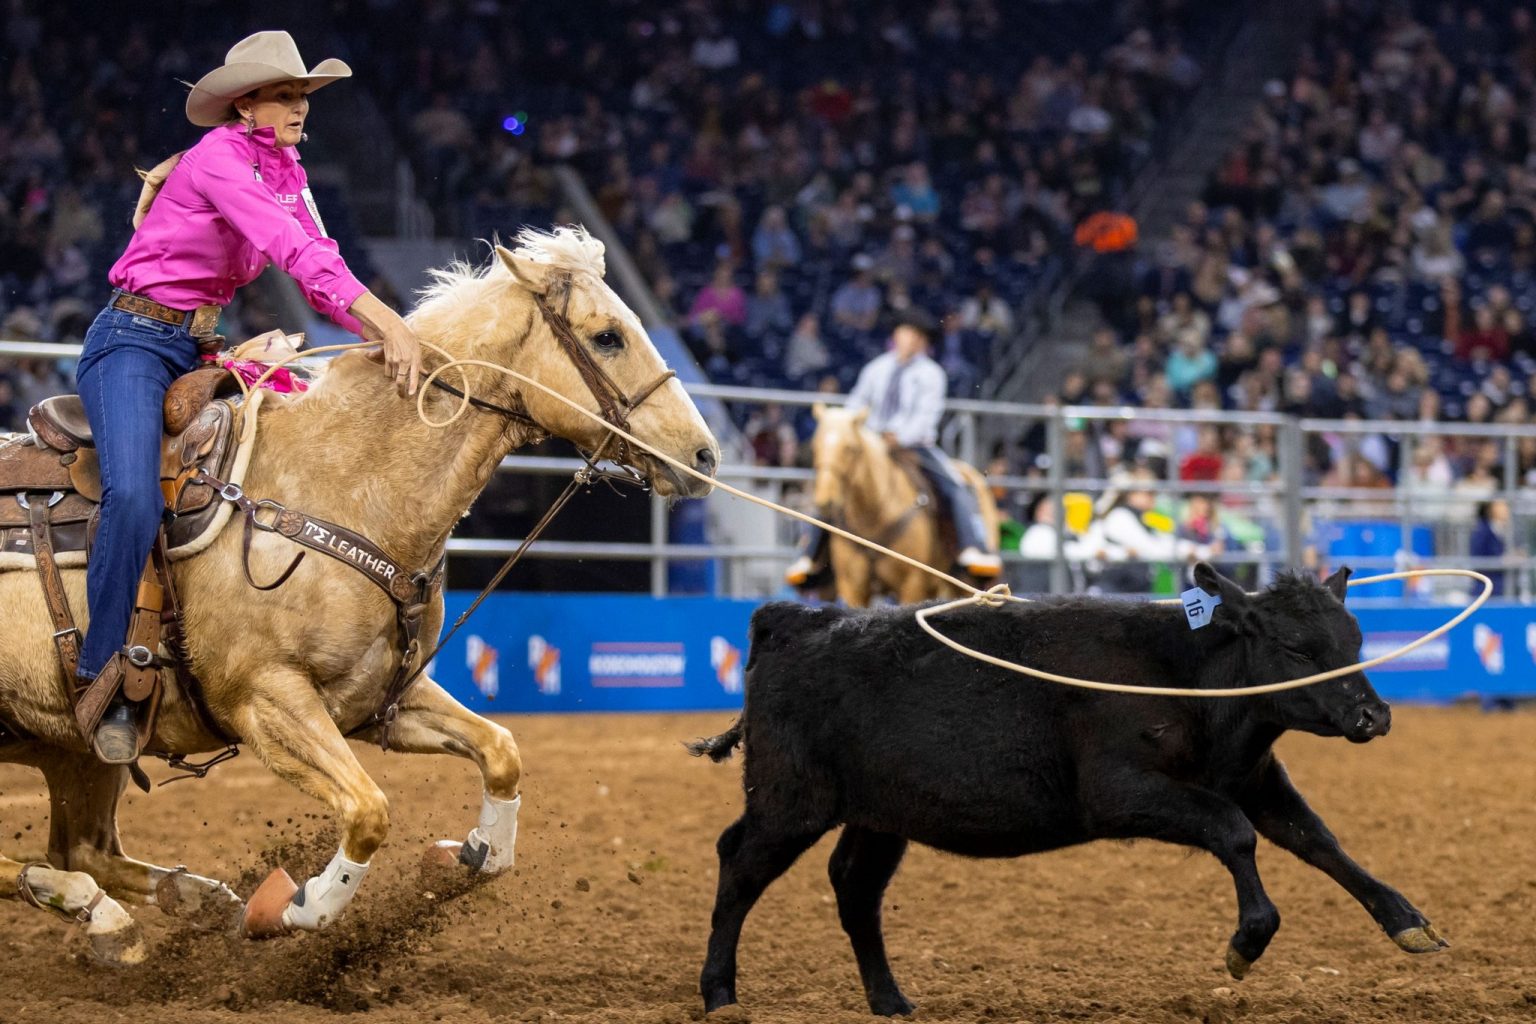 HOUSTON LIVESTOCK SHOW AND RODEO™ ANNOUNCES UPDATES TO 2023